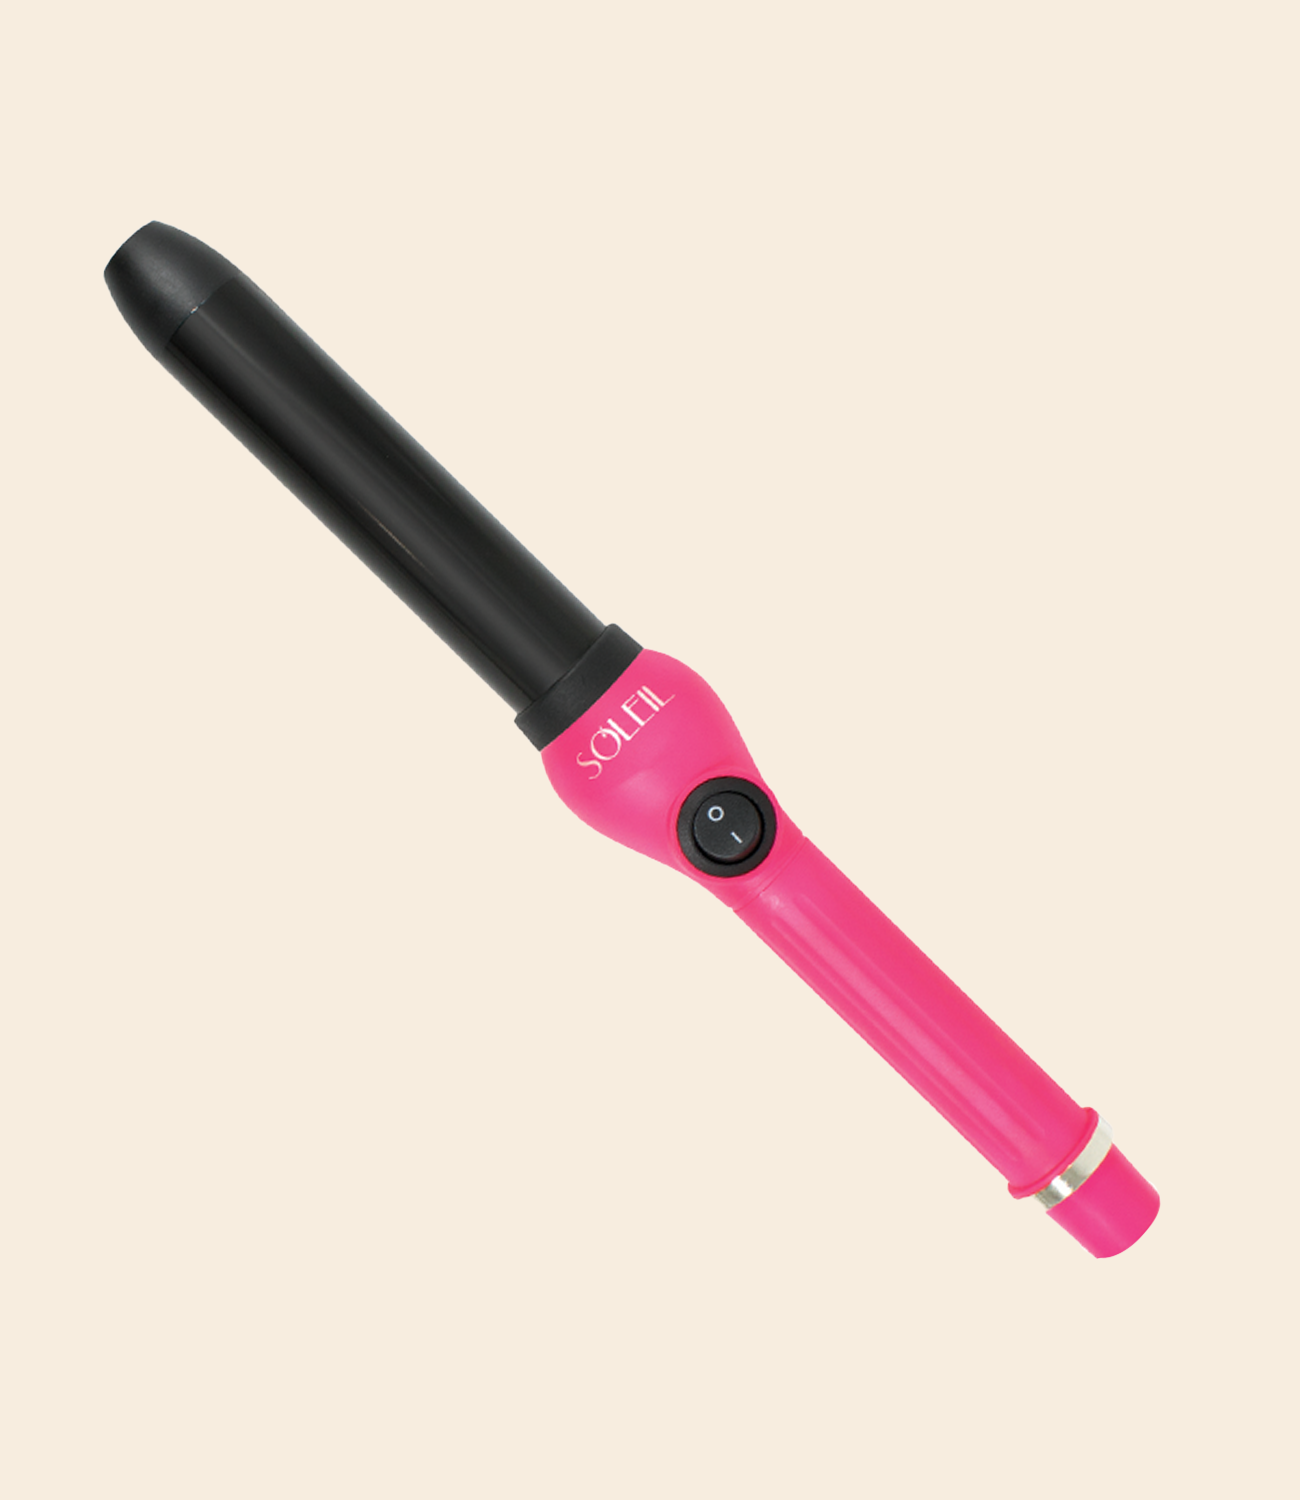 soleil curling iron with one power button, black barrel with 32mm, pink handle and silver details against a light beige background